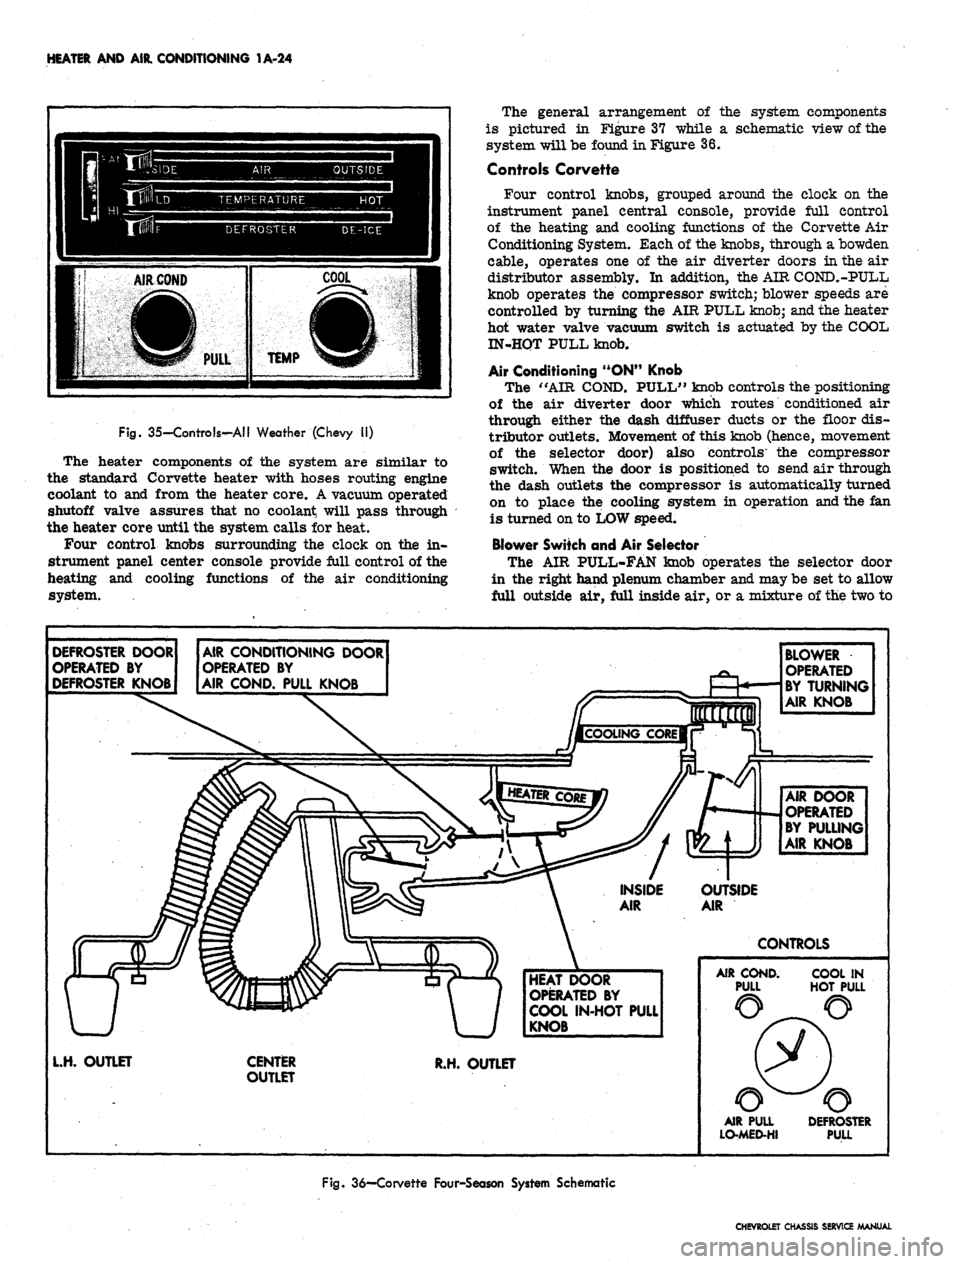 CHEVROLET CAMARO 1967 1.G Chassis Owners Manual 
HEATER AND AIR. CONDITIONING 1A-24

Fig. 35-Controls-AII Weather (Chevy II)

The heater components of the system are similar to

the standard Corvette heater with hoses routing engine

coolant to and